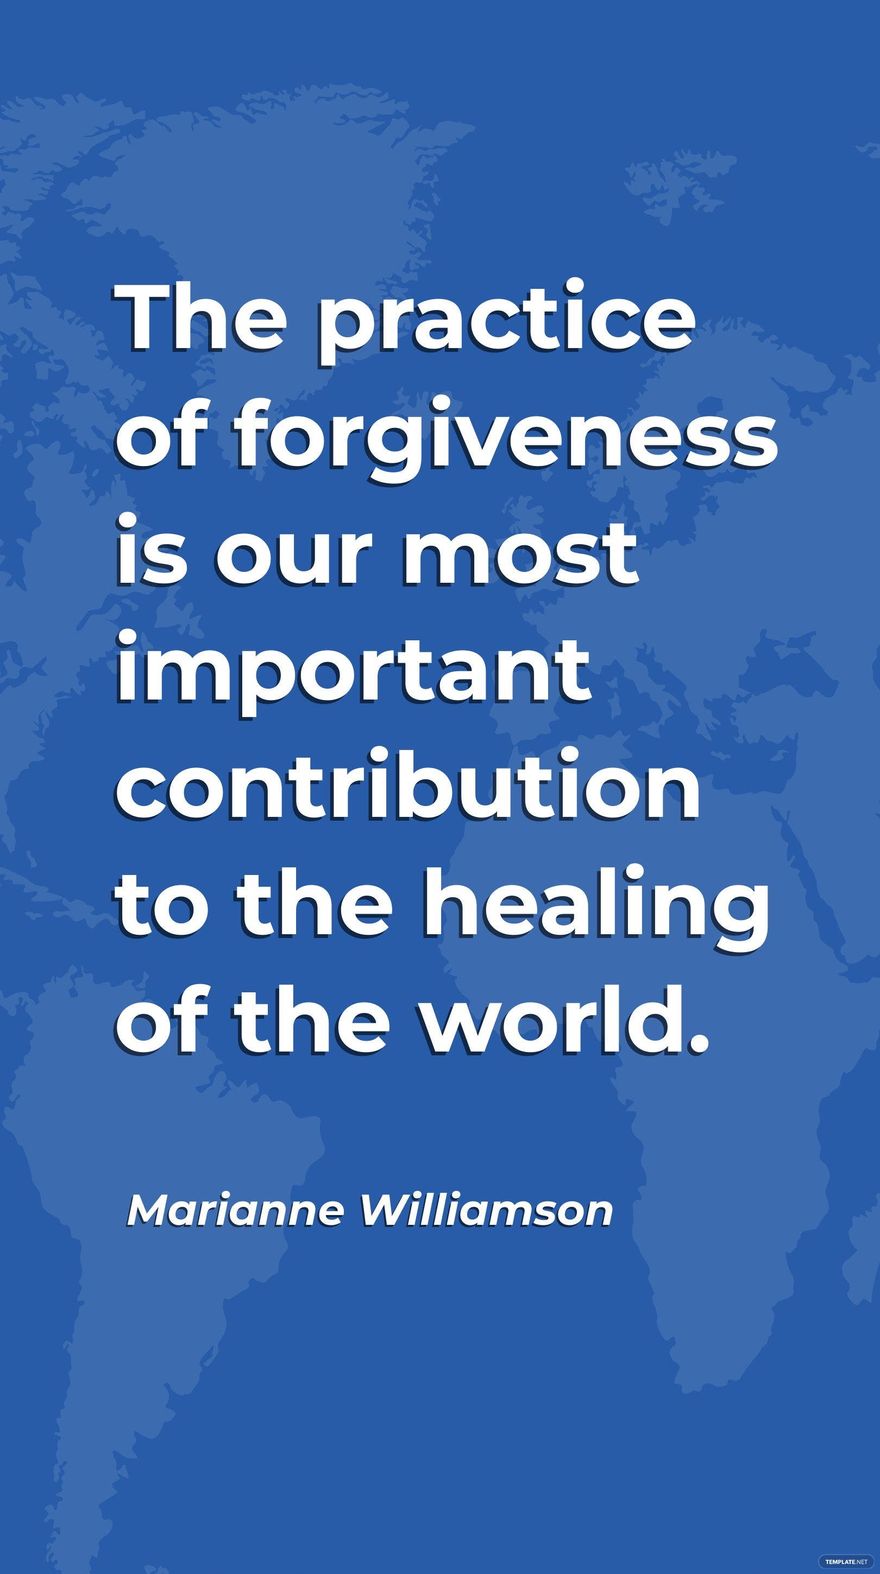 Marianne Williamson - The practice of forgiveness is our most important contribution to the healing of the world. in JPG